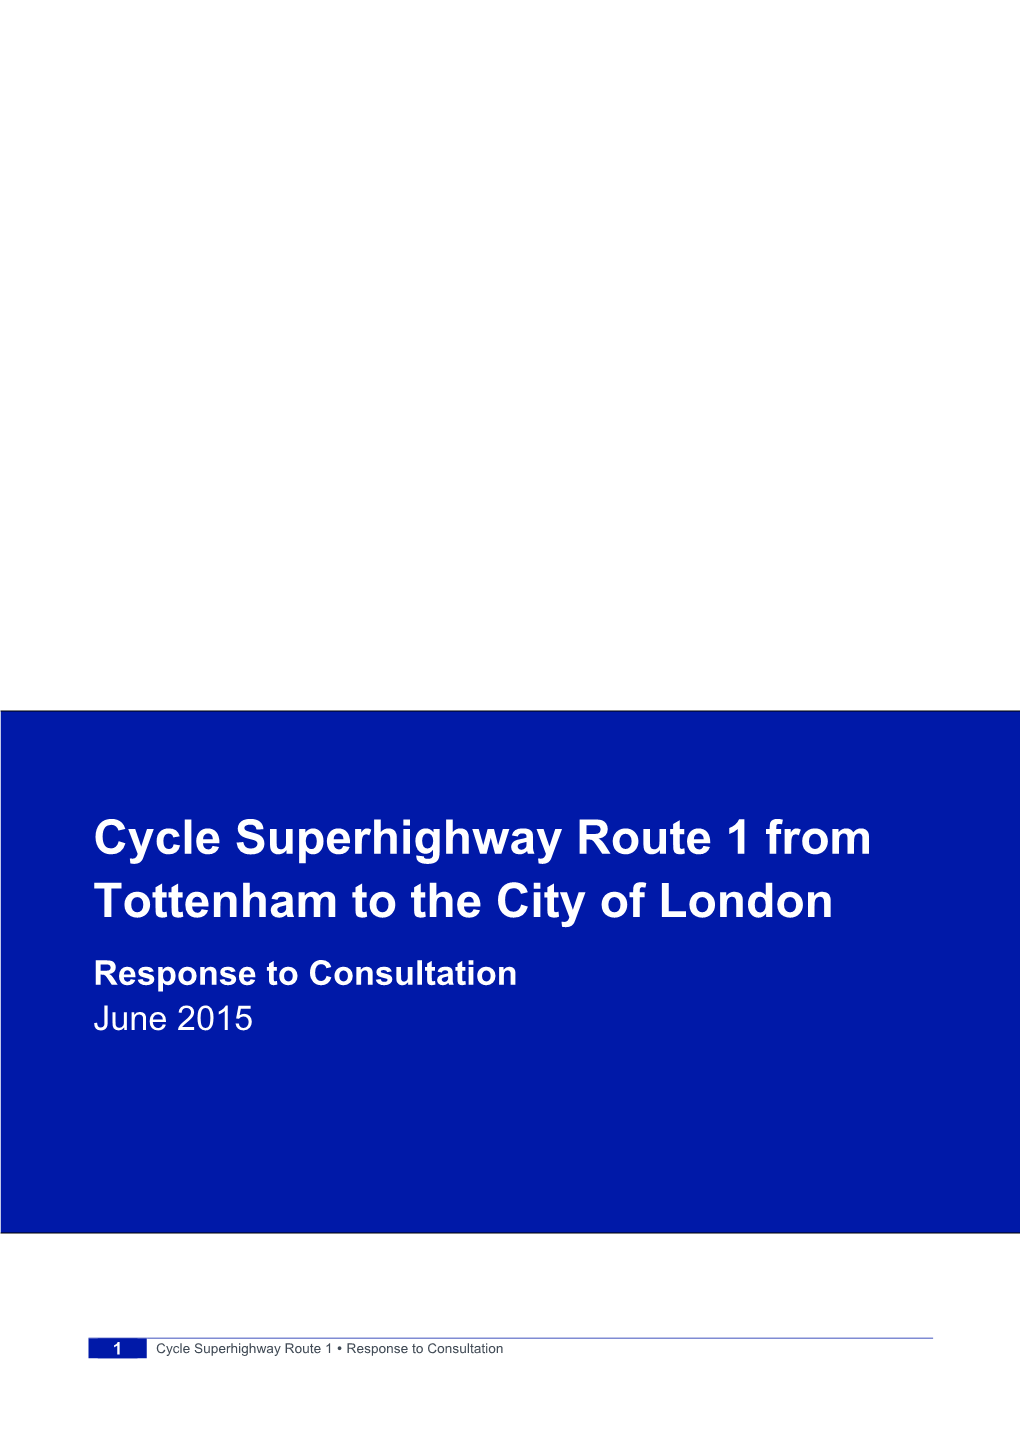 Cycle Superhighway Route 1 from Tottenham to the City of London Response to Consultation June 2015